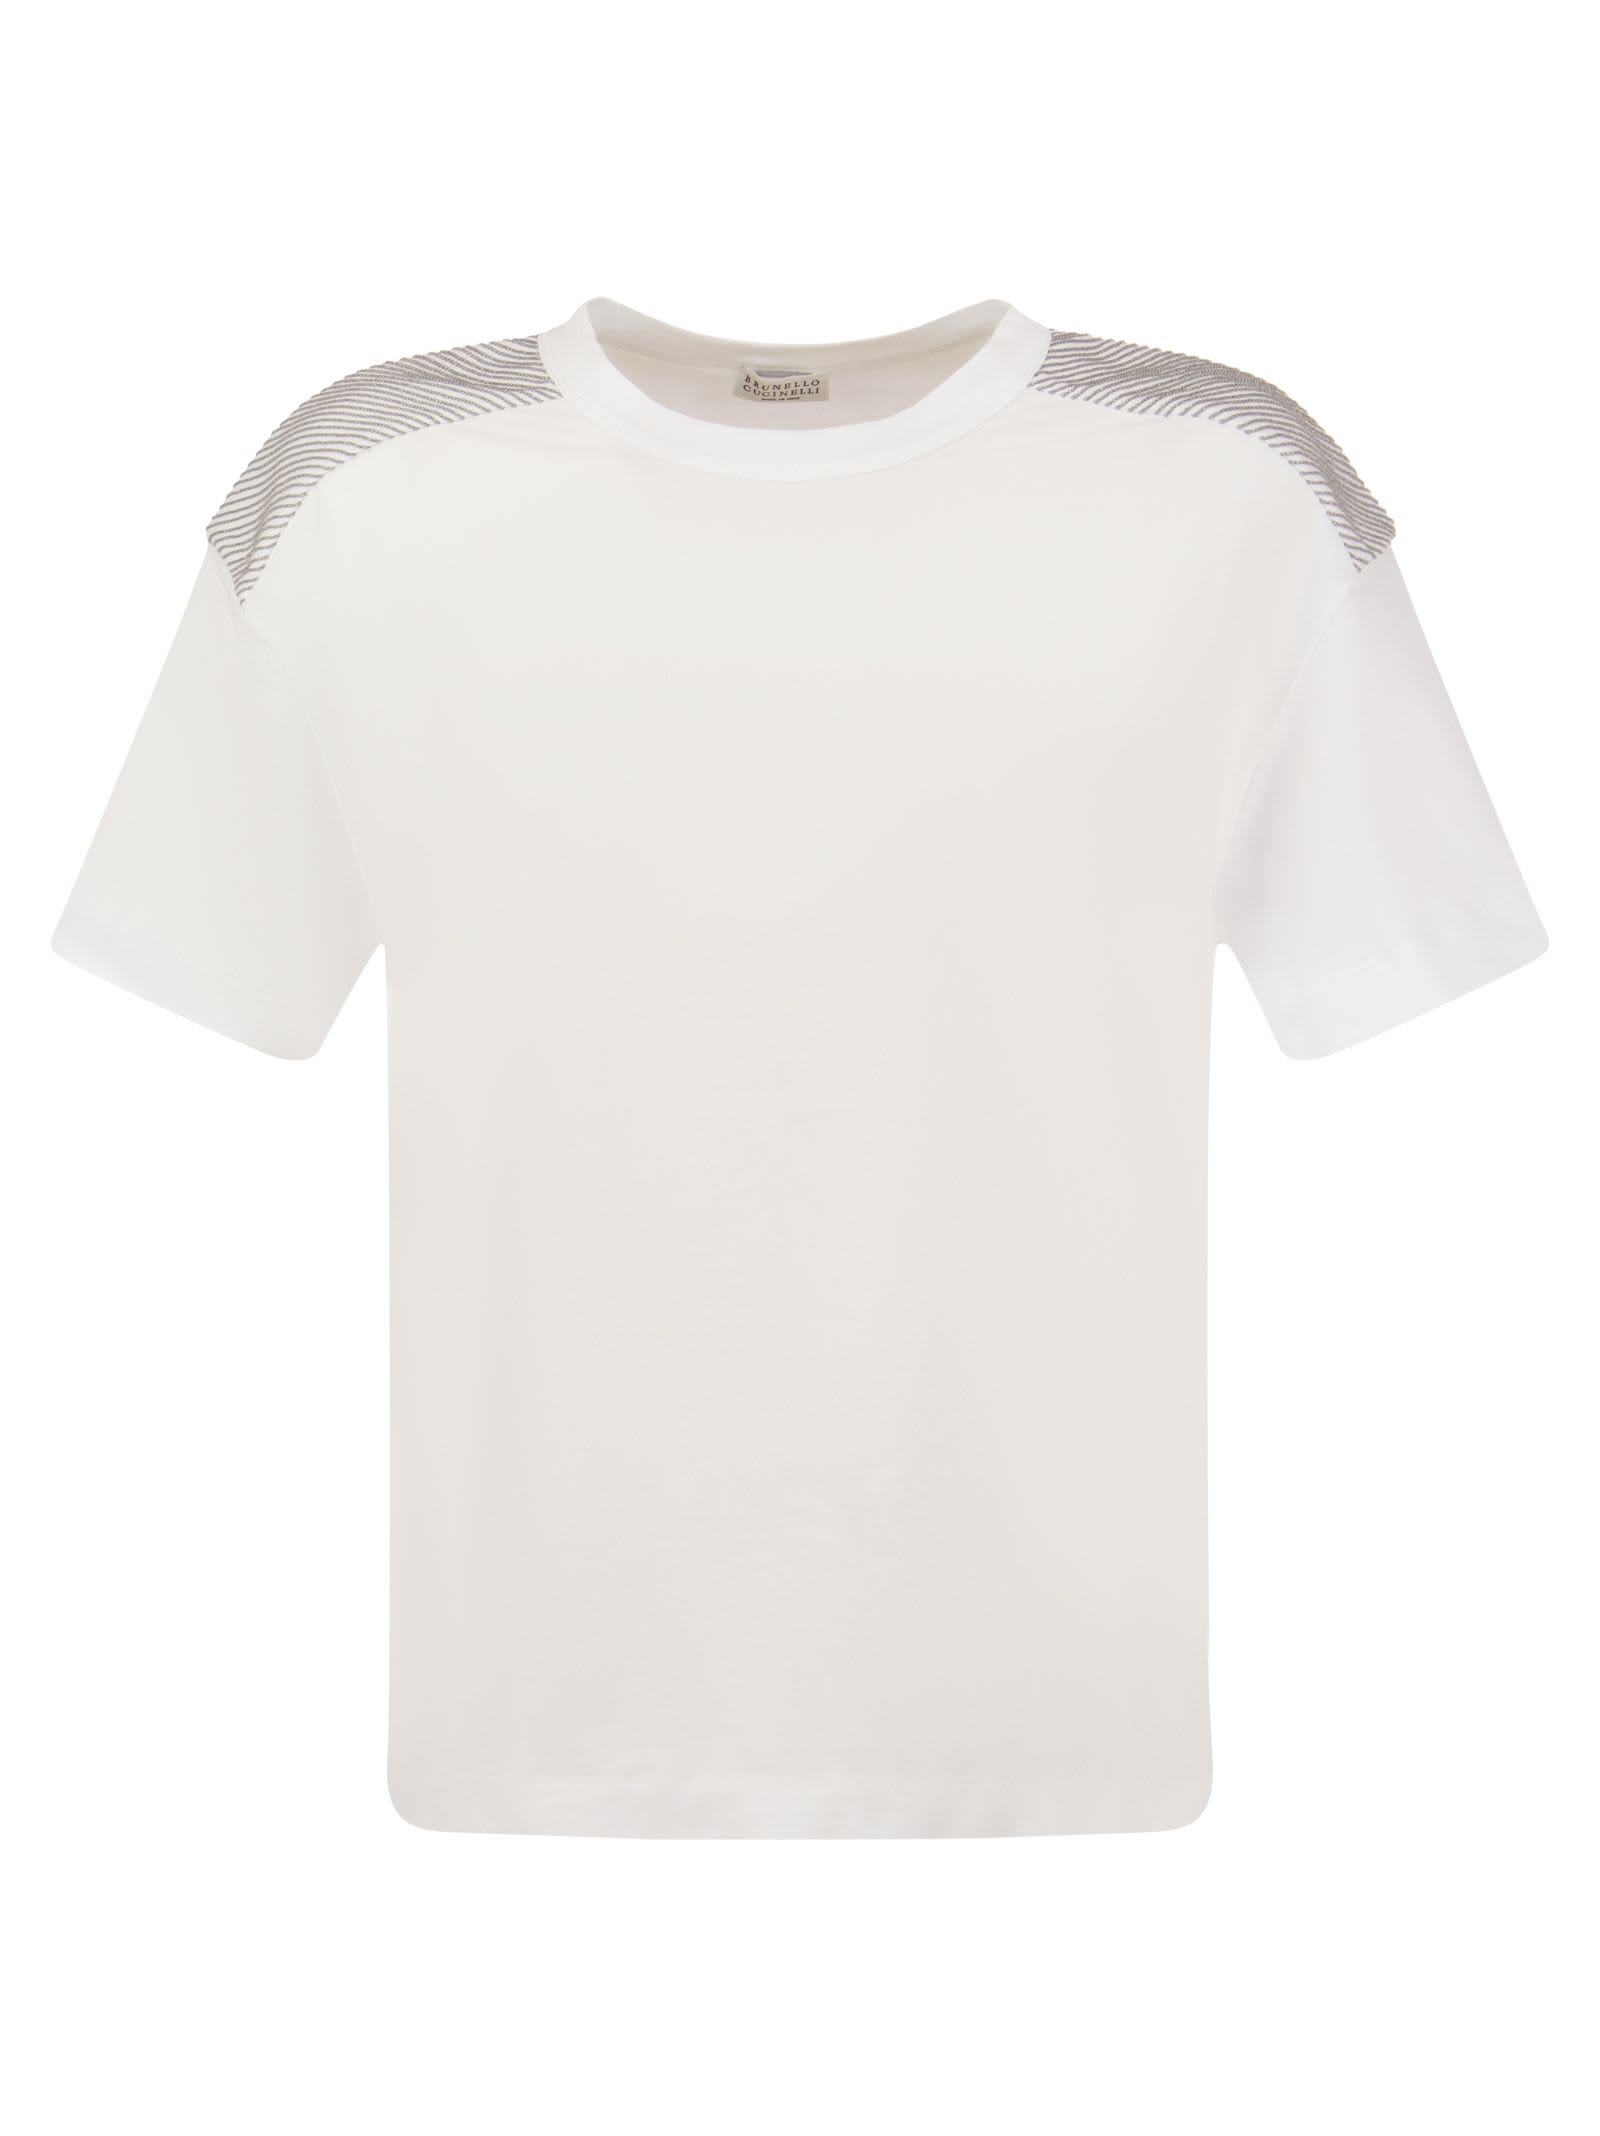 BRUNELLO CUCINELLI STRETCH COTTON JERSEY T-SHIRT WITH SHINY SHOULDERS